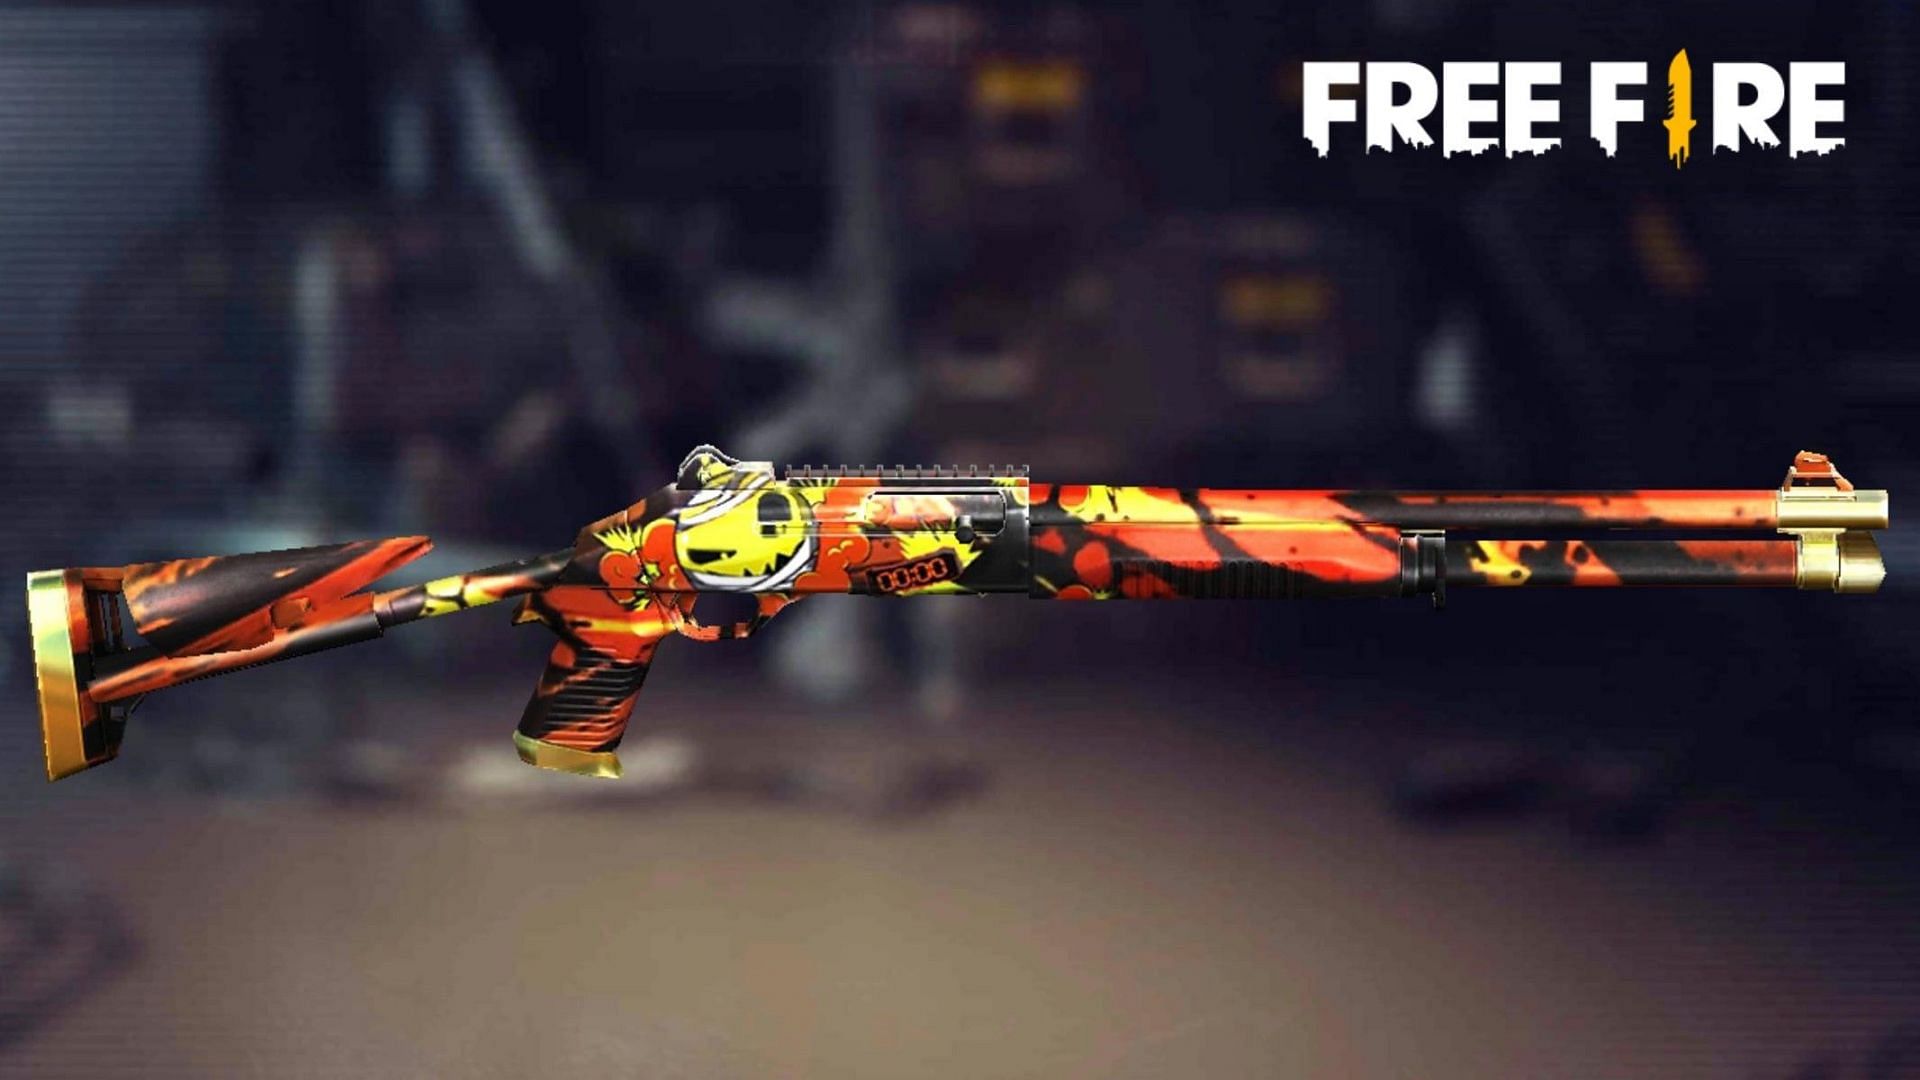 This skin can be claimed by the players for free (Image via Free Fire)